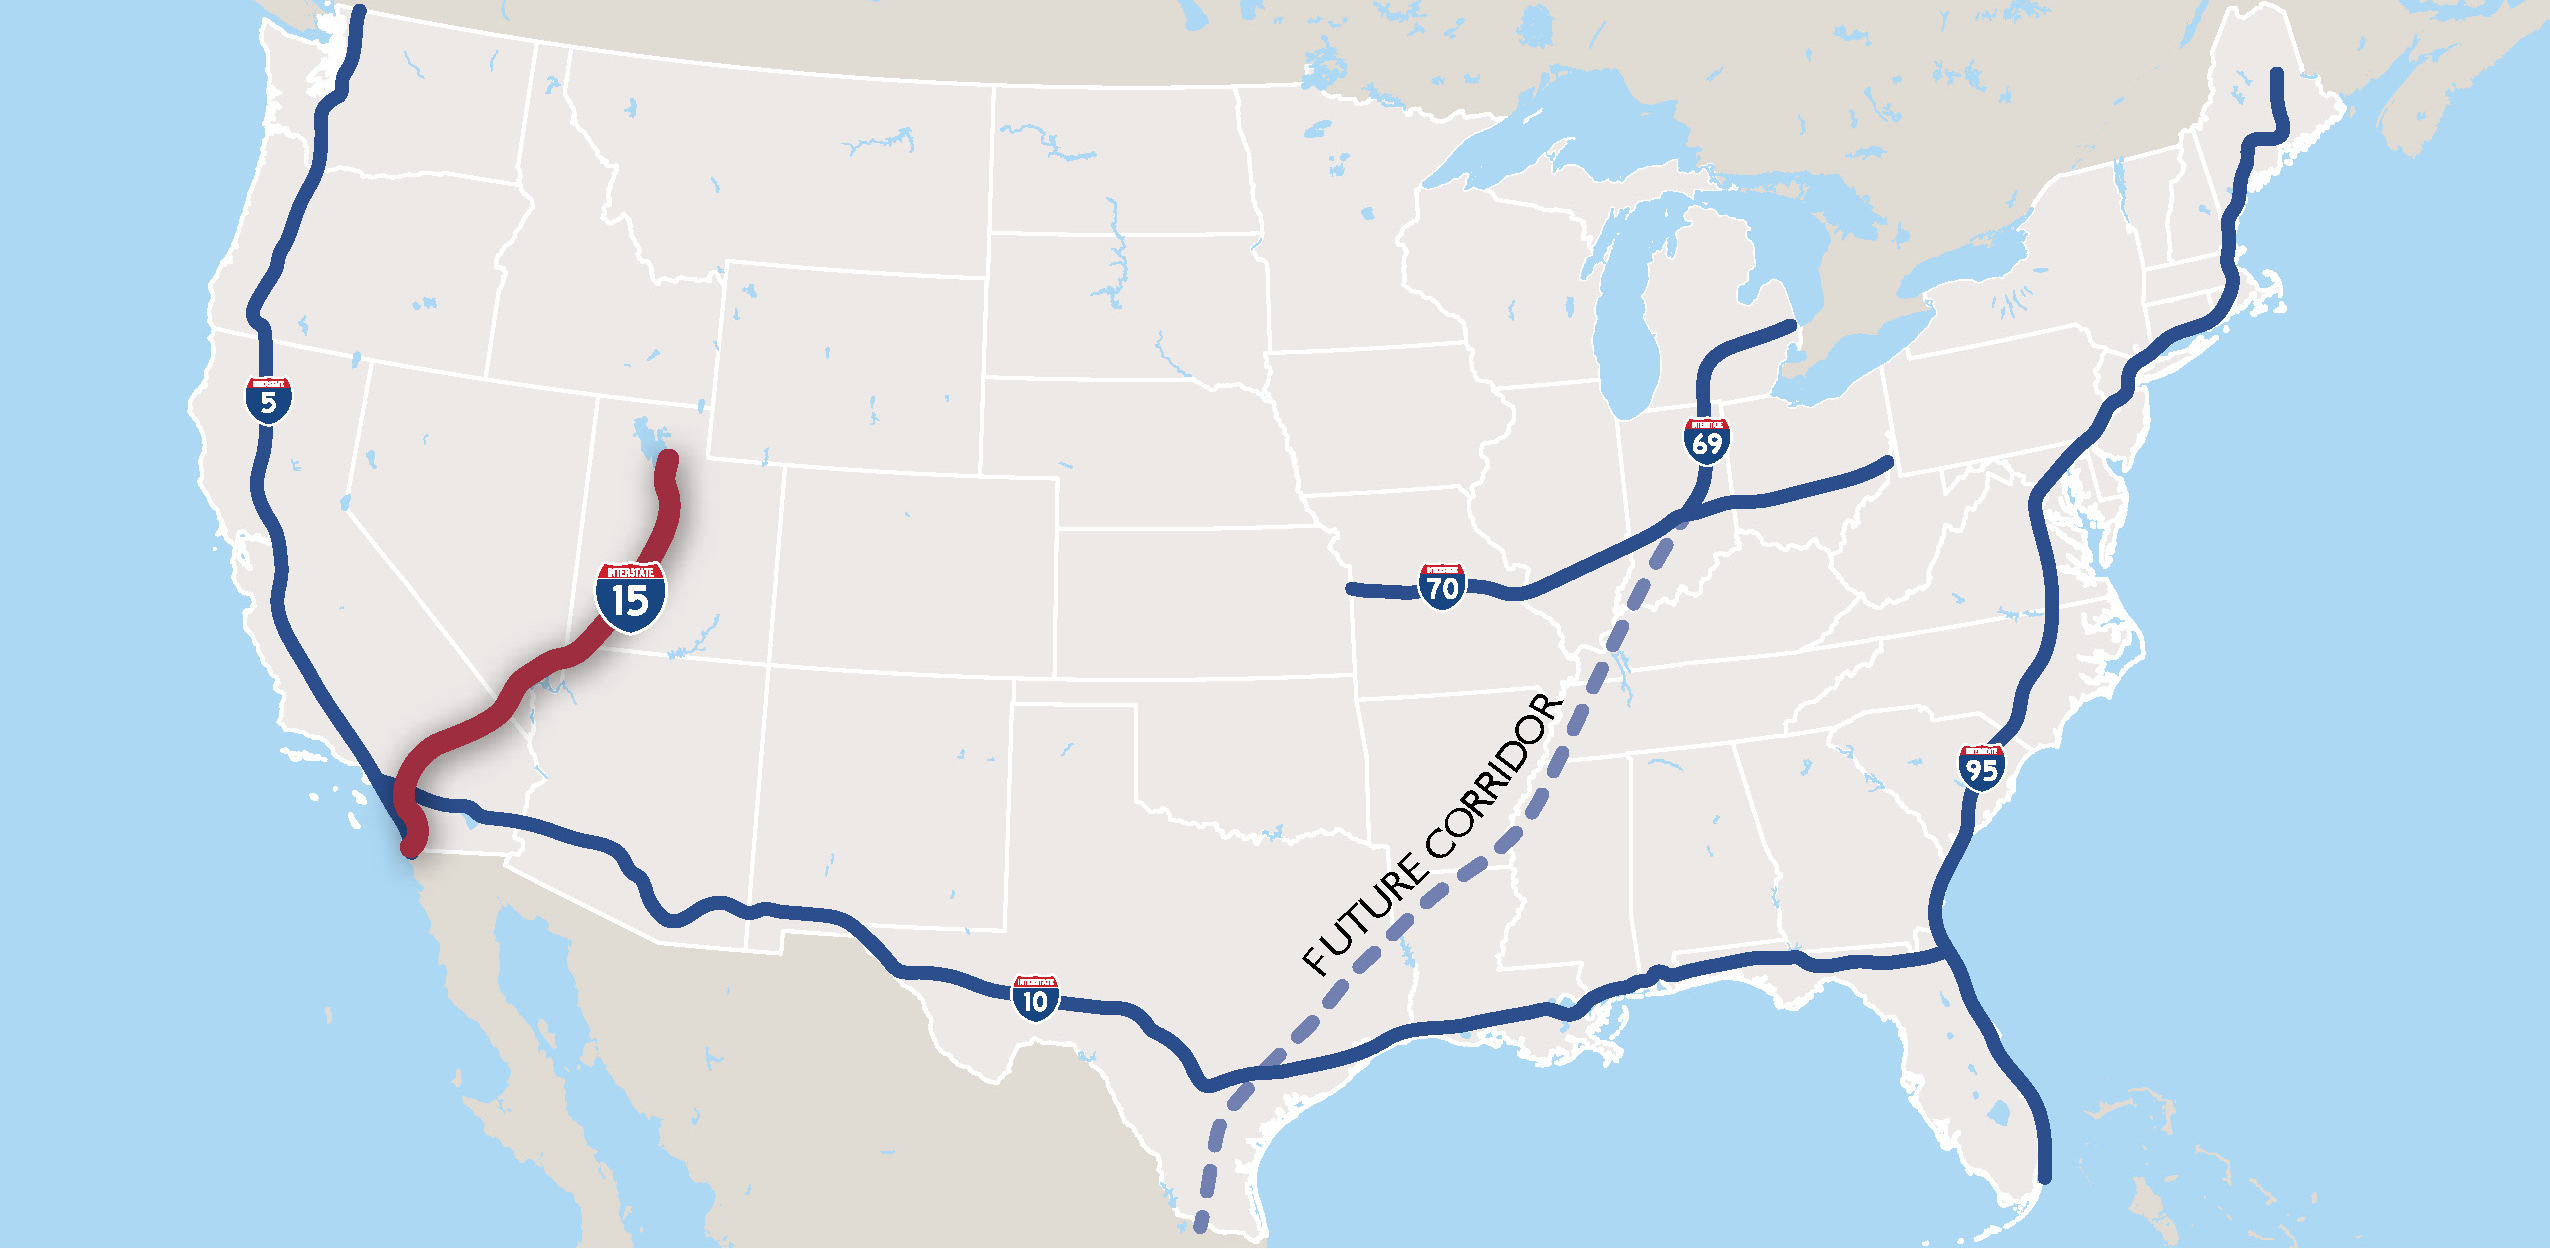 Map showing federally-designated corridors of the future in the United States